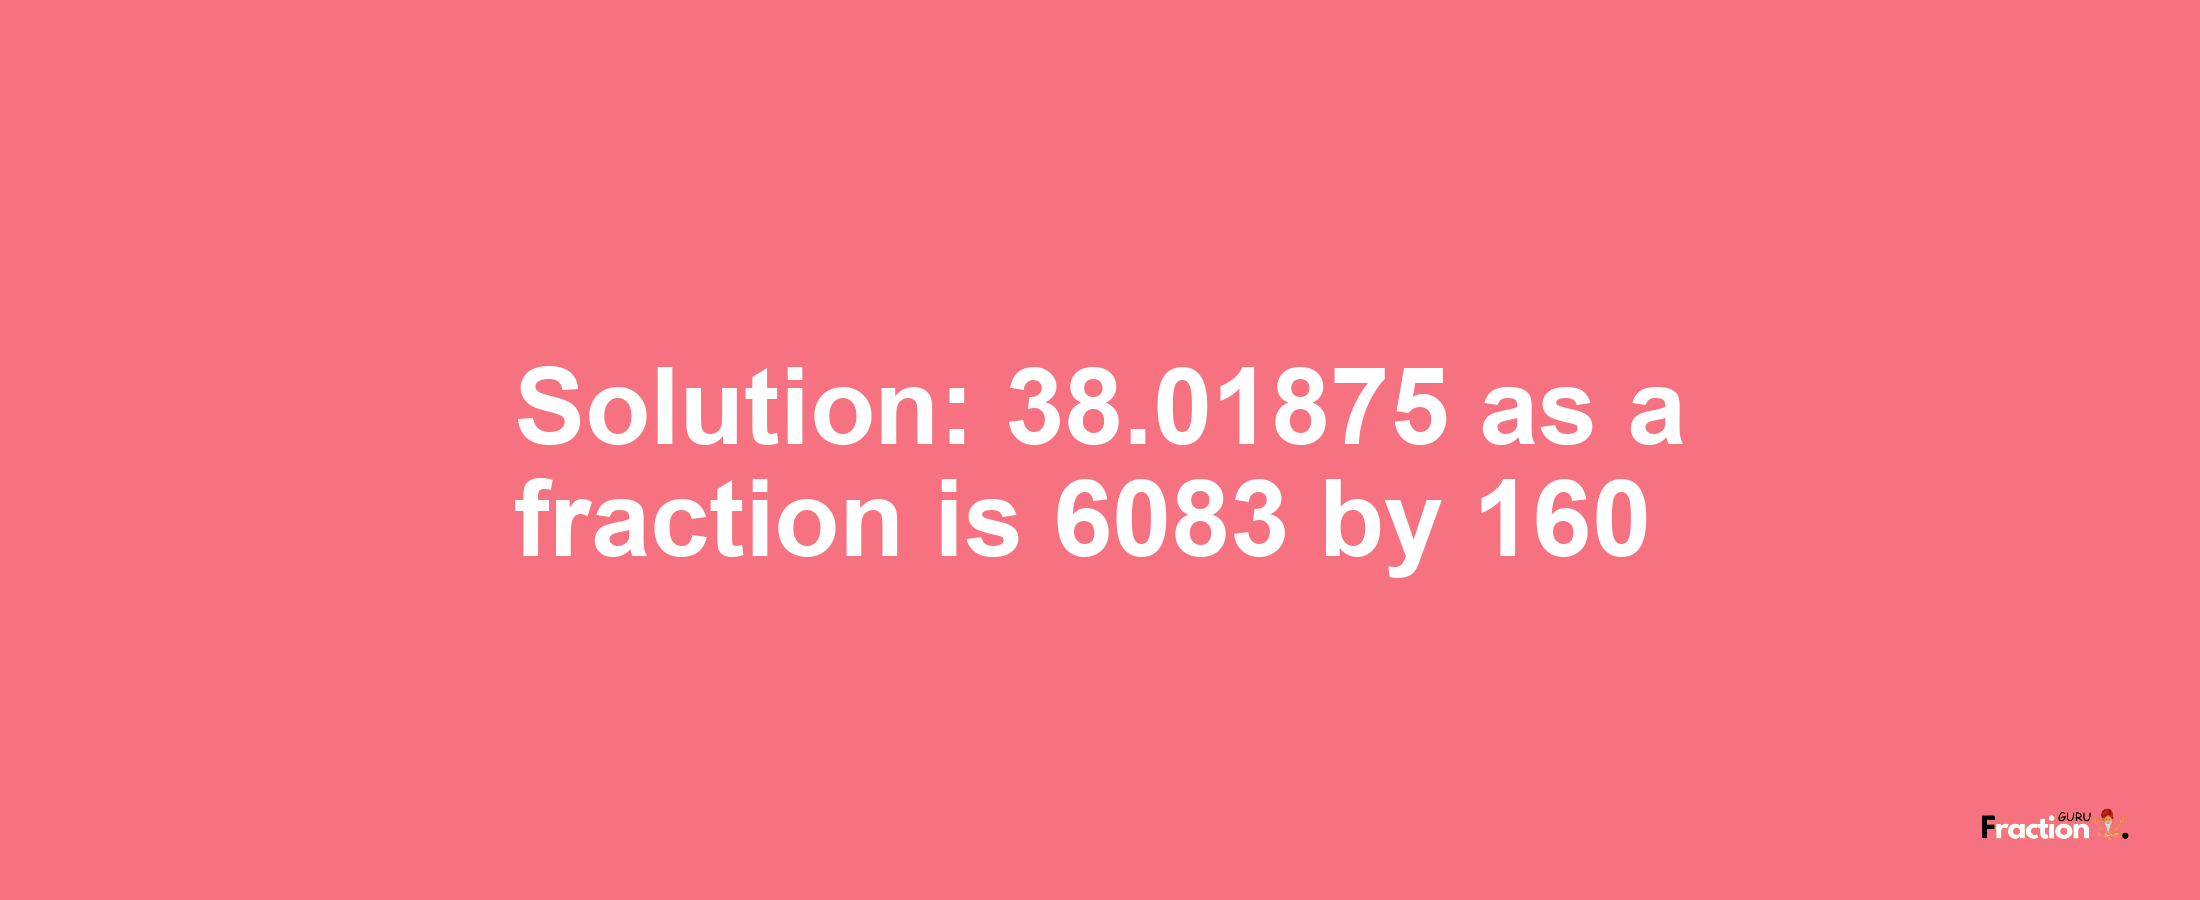 Solution:38.01875 as a fraction is 6083/160